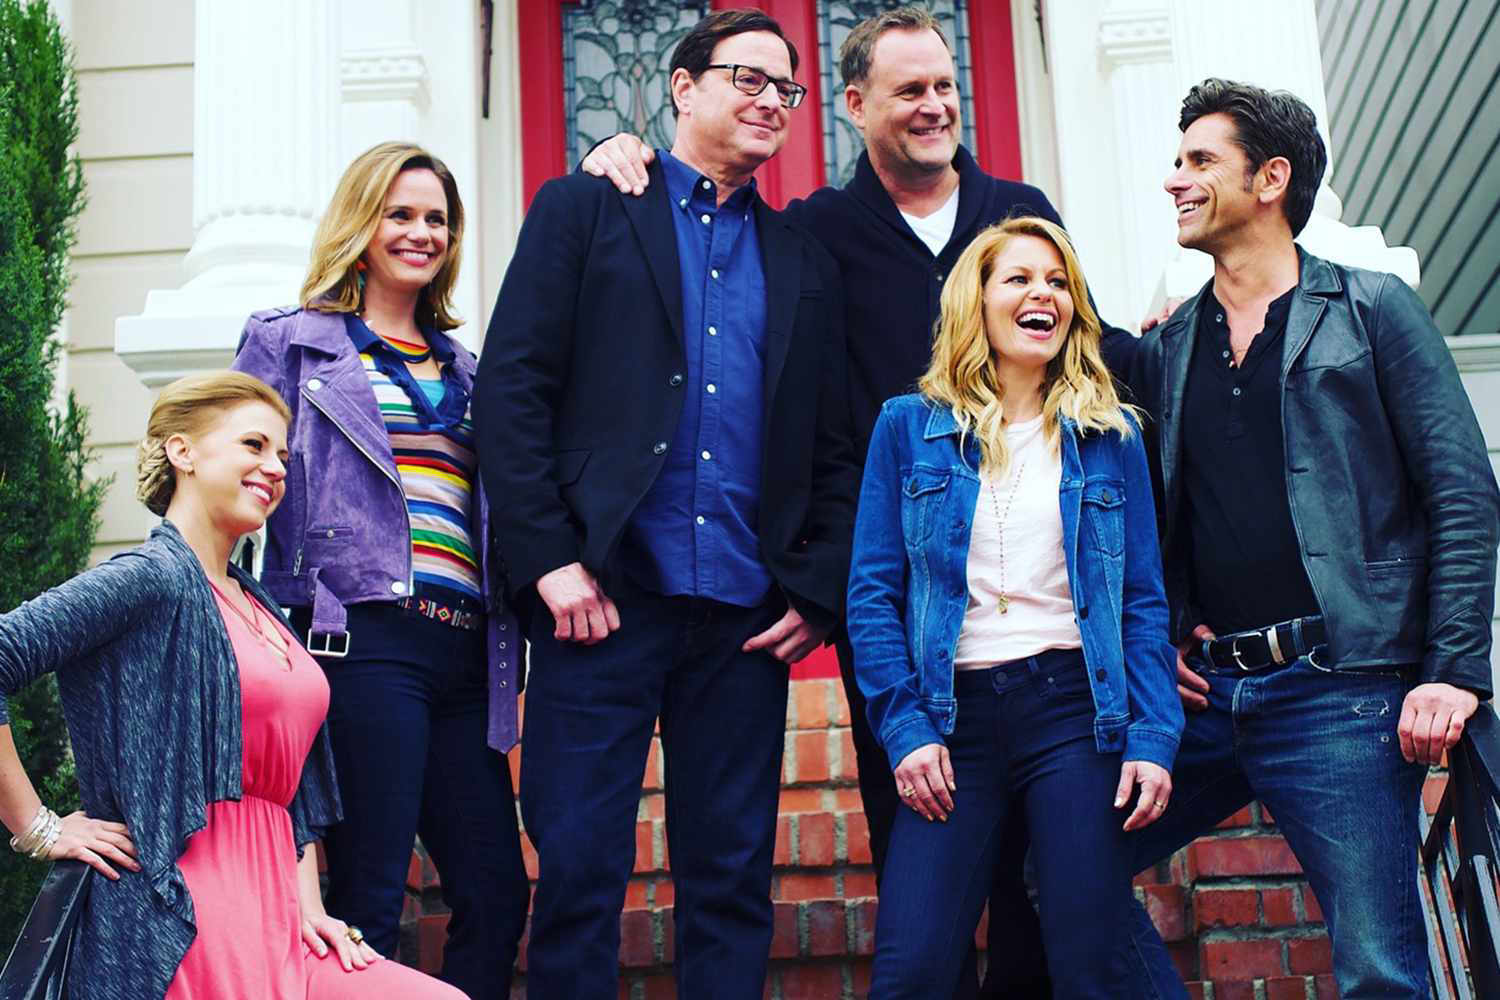 John Stamos Shares One Of The Last Photos With “full House” Cast Including The Late Bob Saget